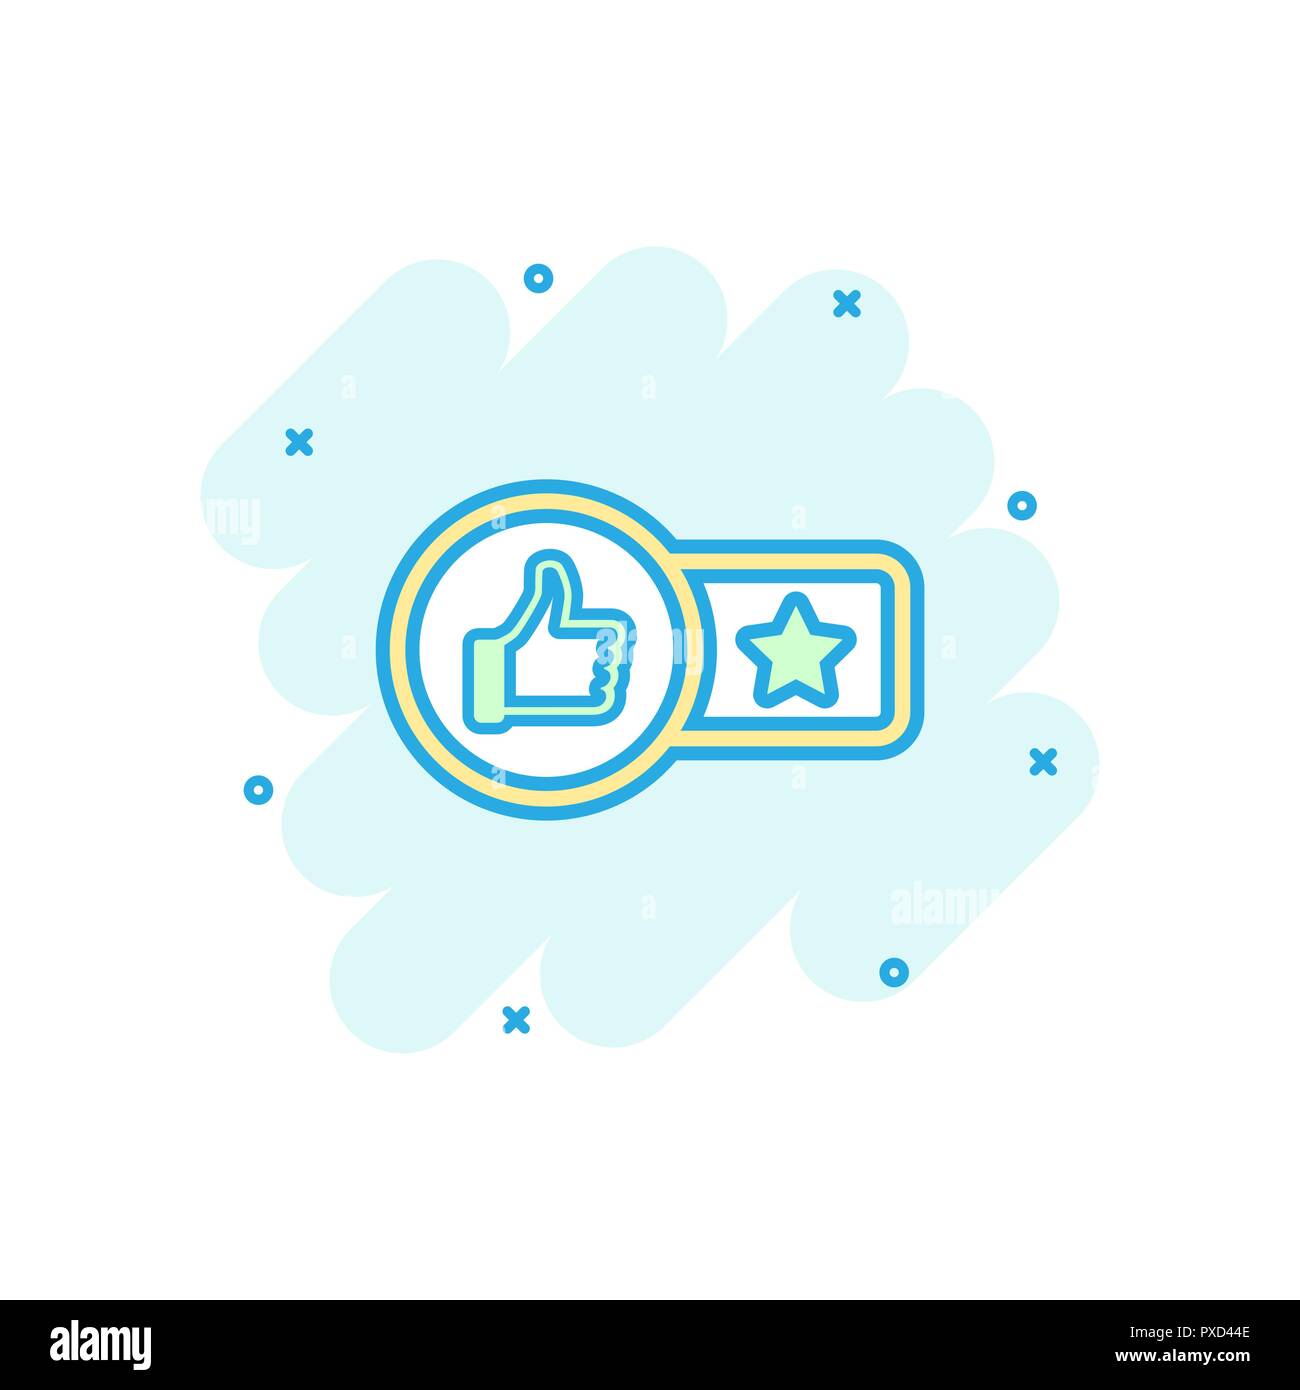 Vector cartoon customer review 1 star icon in comic style. Thumb up with stars rating sign illustration pictogram. Review business splash effect conce Stock Vector